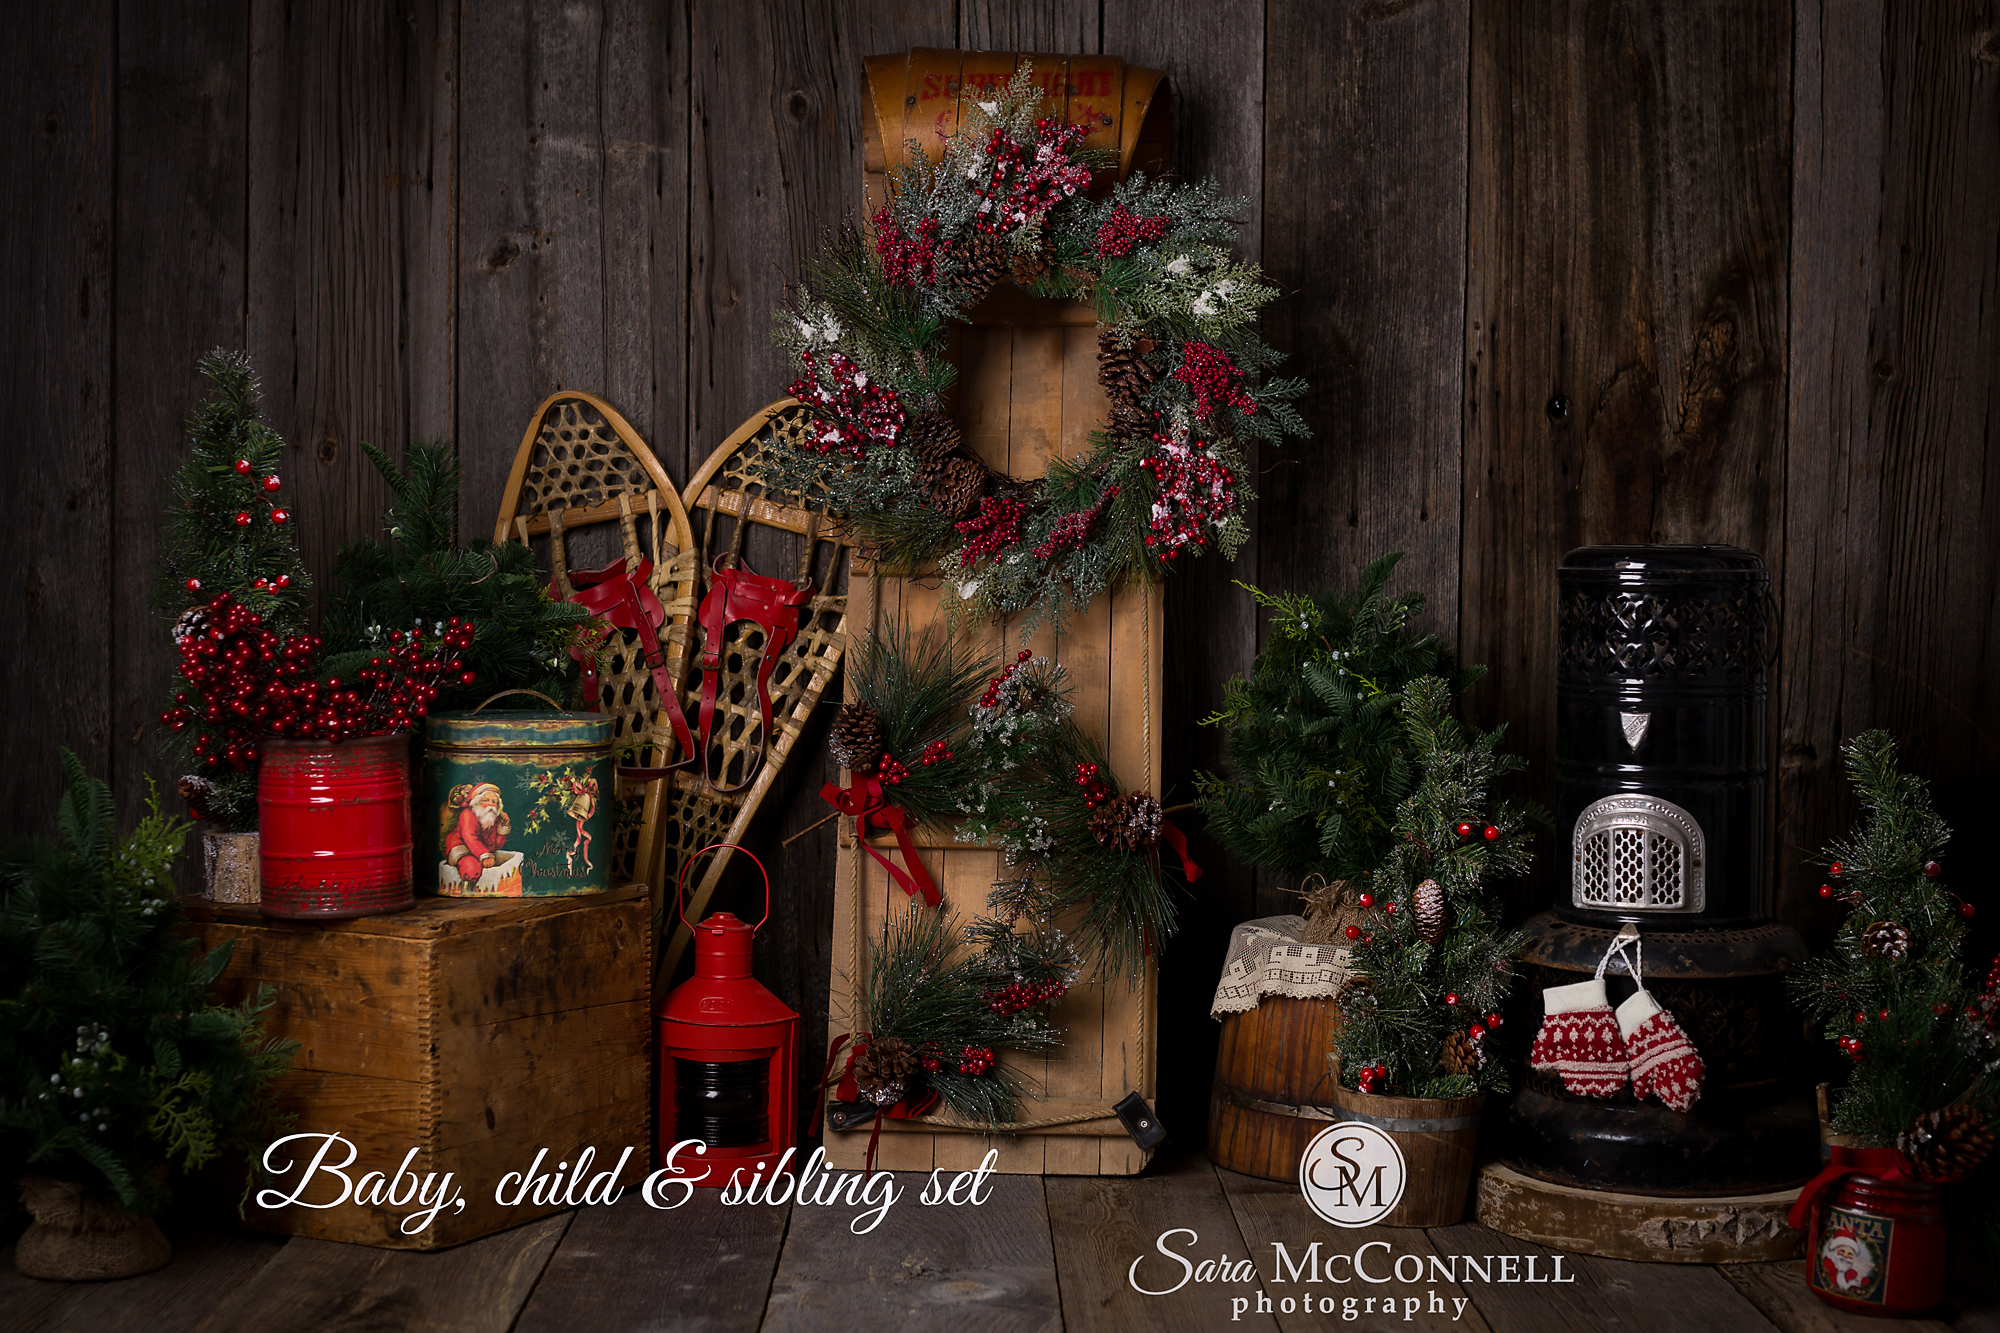 FAQ About 2016 Holiday Sessions ~ Sara McConnell Photography